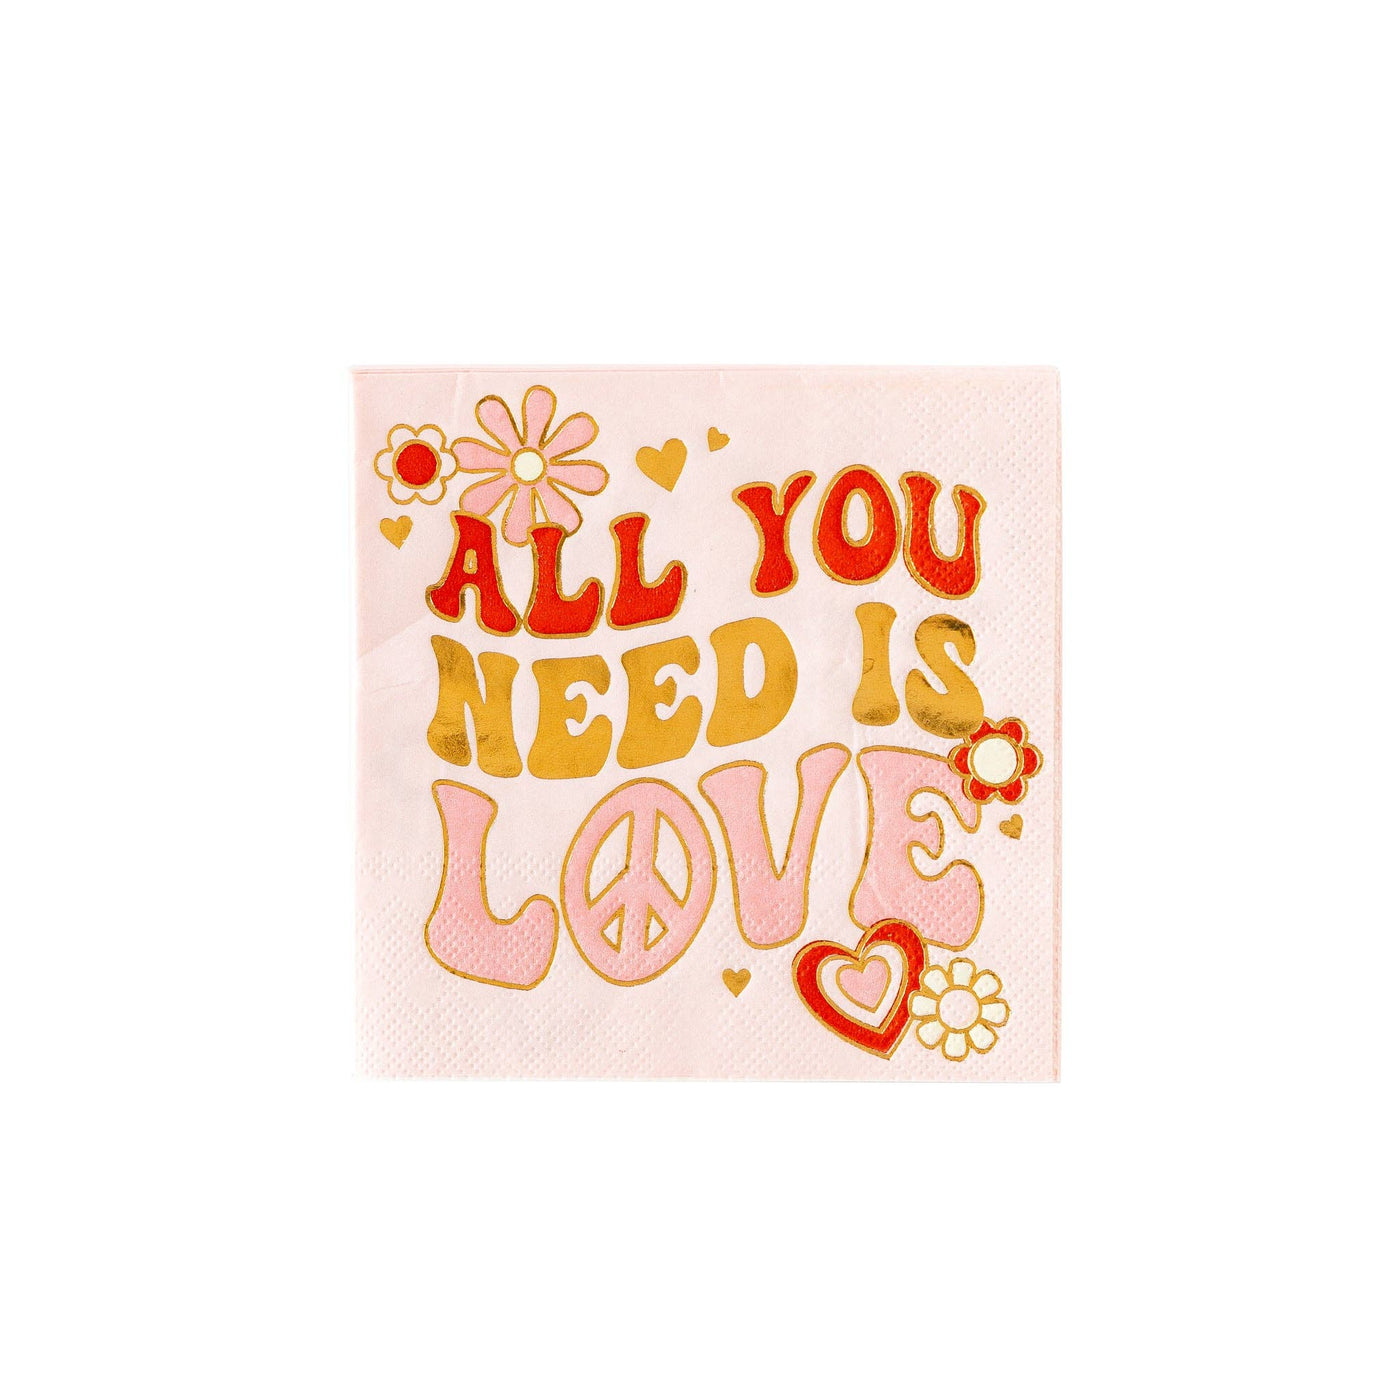 All you Need is Love Napkins